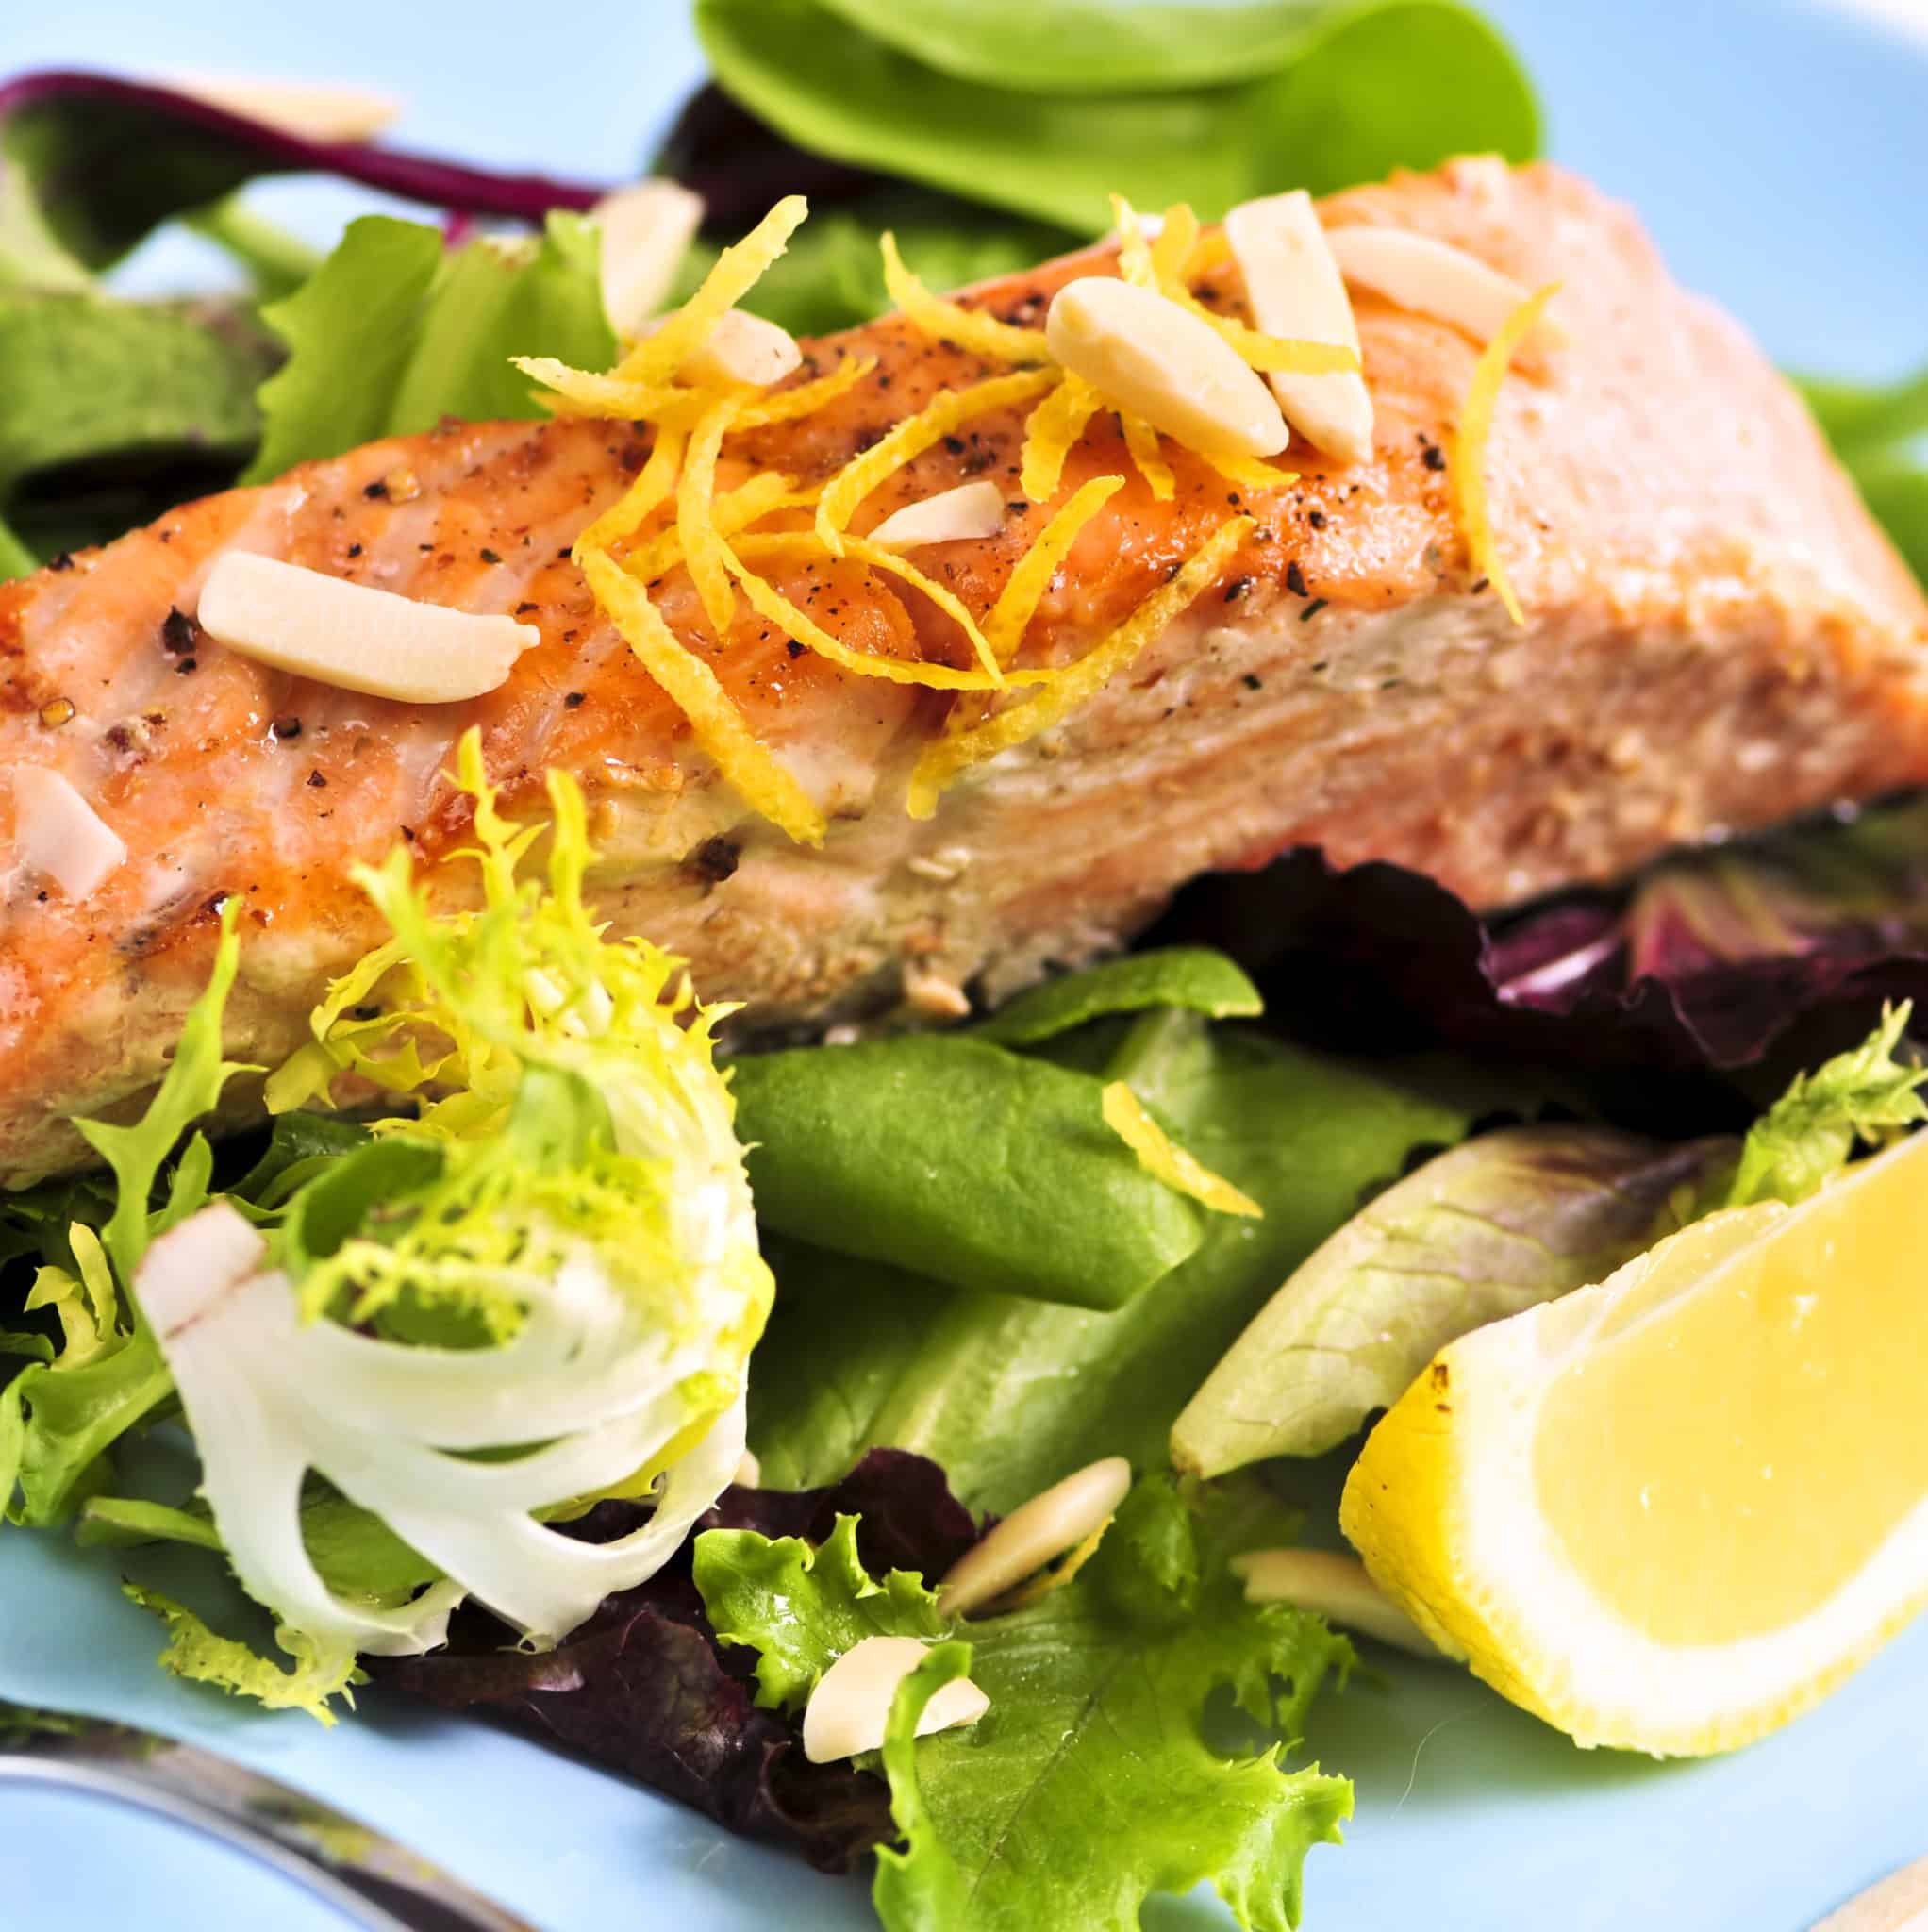 Grilled salmon on top of green lettuce, slivered almonds and lemon